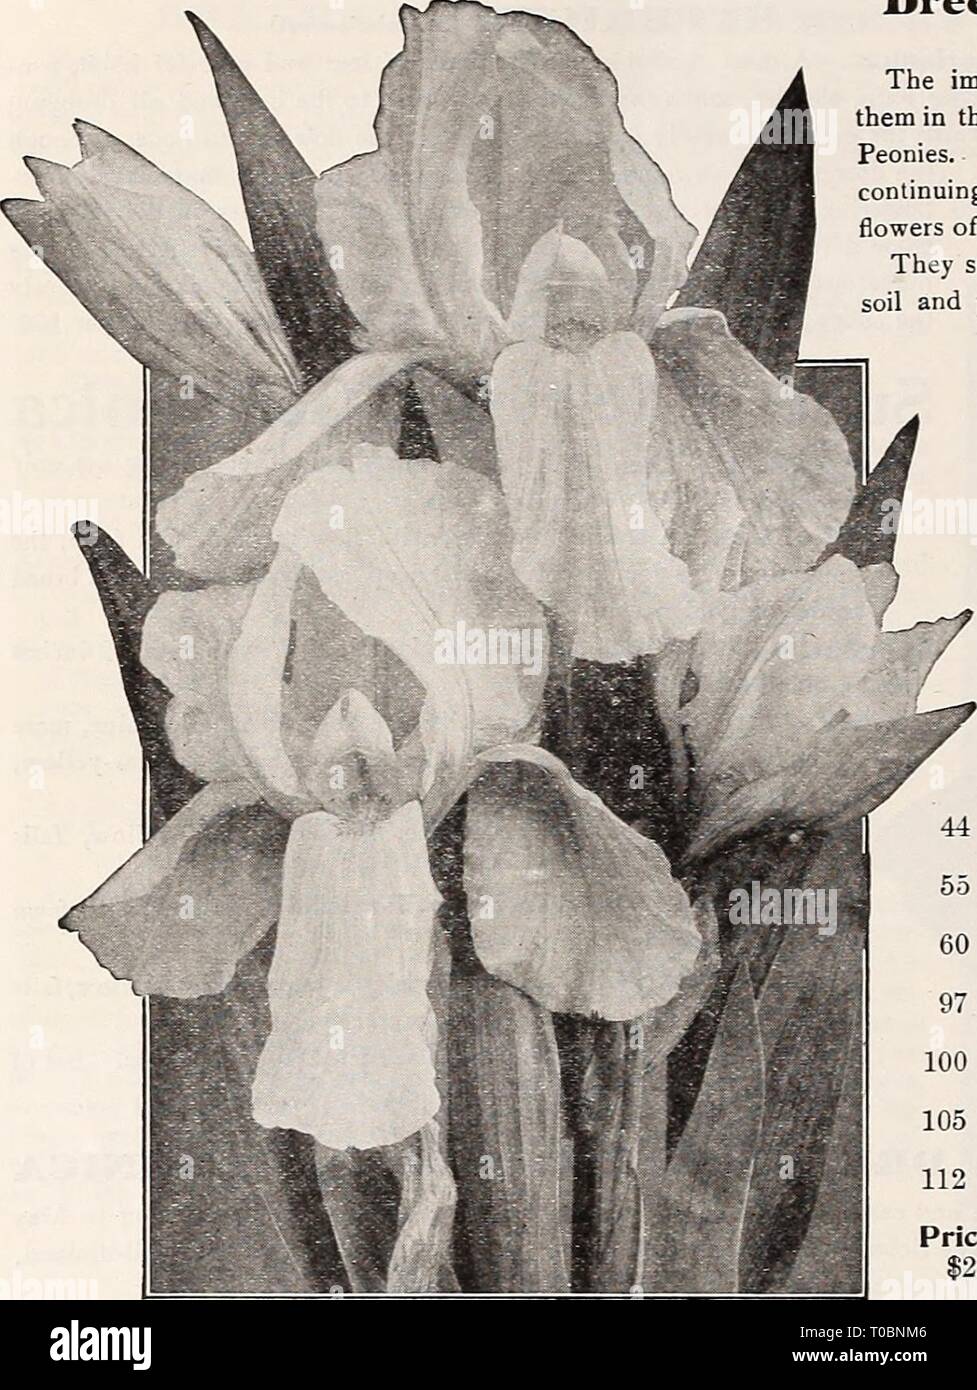 Dreer's garden book 1921 (1921) Dreer's garden book 1921 dreersgardenbook1921henr Year: 1921  174 ;HWADREER -PHIIAKl3PHIA-fi-^HARCfr PEREhhIAL PLANTS- RfH    Dreer's Imperial Japanese Iris (Iris Kaempferi) The improved forms of this beautiful flower have placed them in the same rank popularly as the Hardy Phloxes and Peonies. Coming into flower about the middle of June, and continuing for five or six weeks, they fill in a period when flowers of this attractive type are particularly welcome. They succeed in almost any soil and position, but like ricli soil and plenty of water when they are for Stock Photo